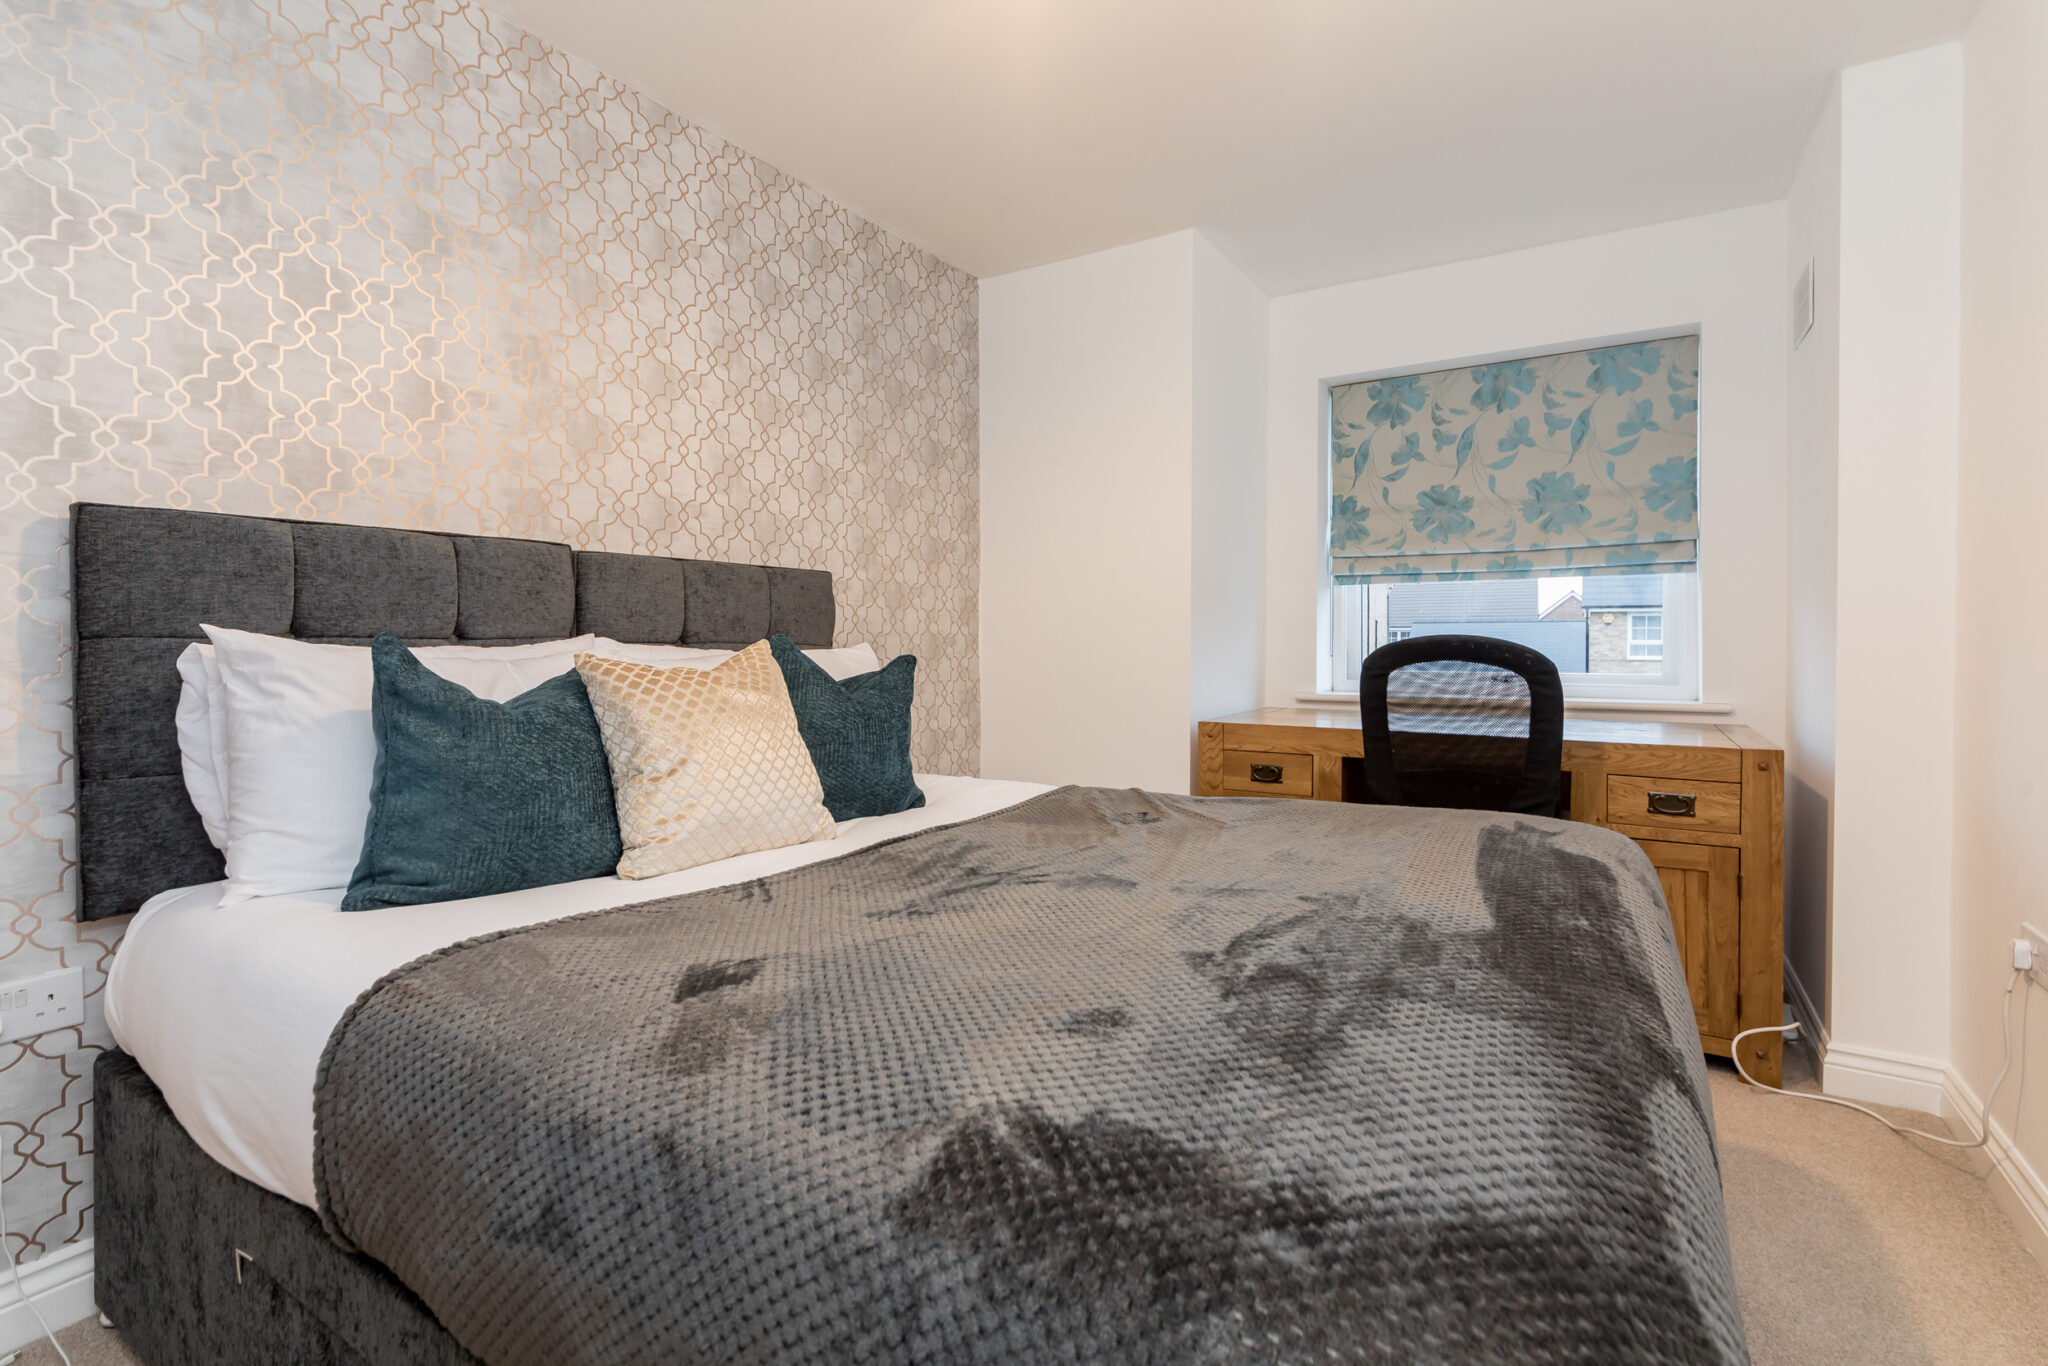 Our Cheapest Accommodations Milton Keynes is big four-bedroom house in , It has everything you need. A pet friendly accommodation, With space for up to 8 people, it's great for families or workers. Enjoy modern amenities, a garden, and parking. Contact Us 0208 691 3920 Now!